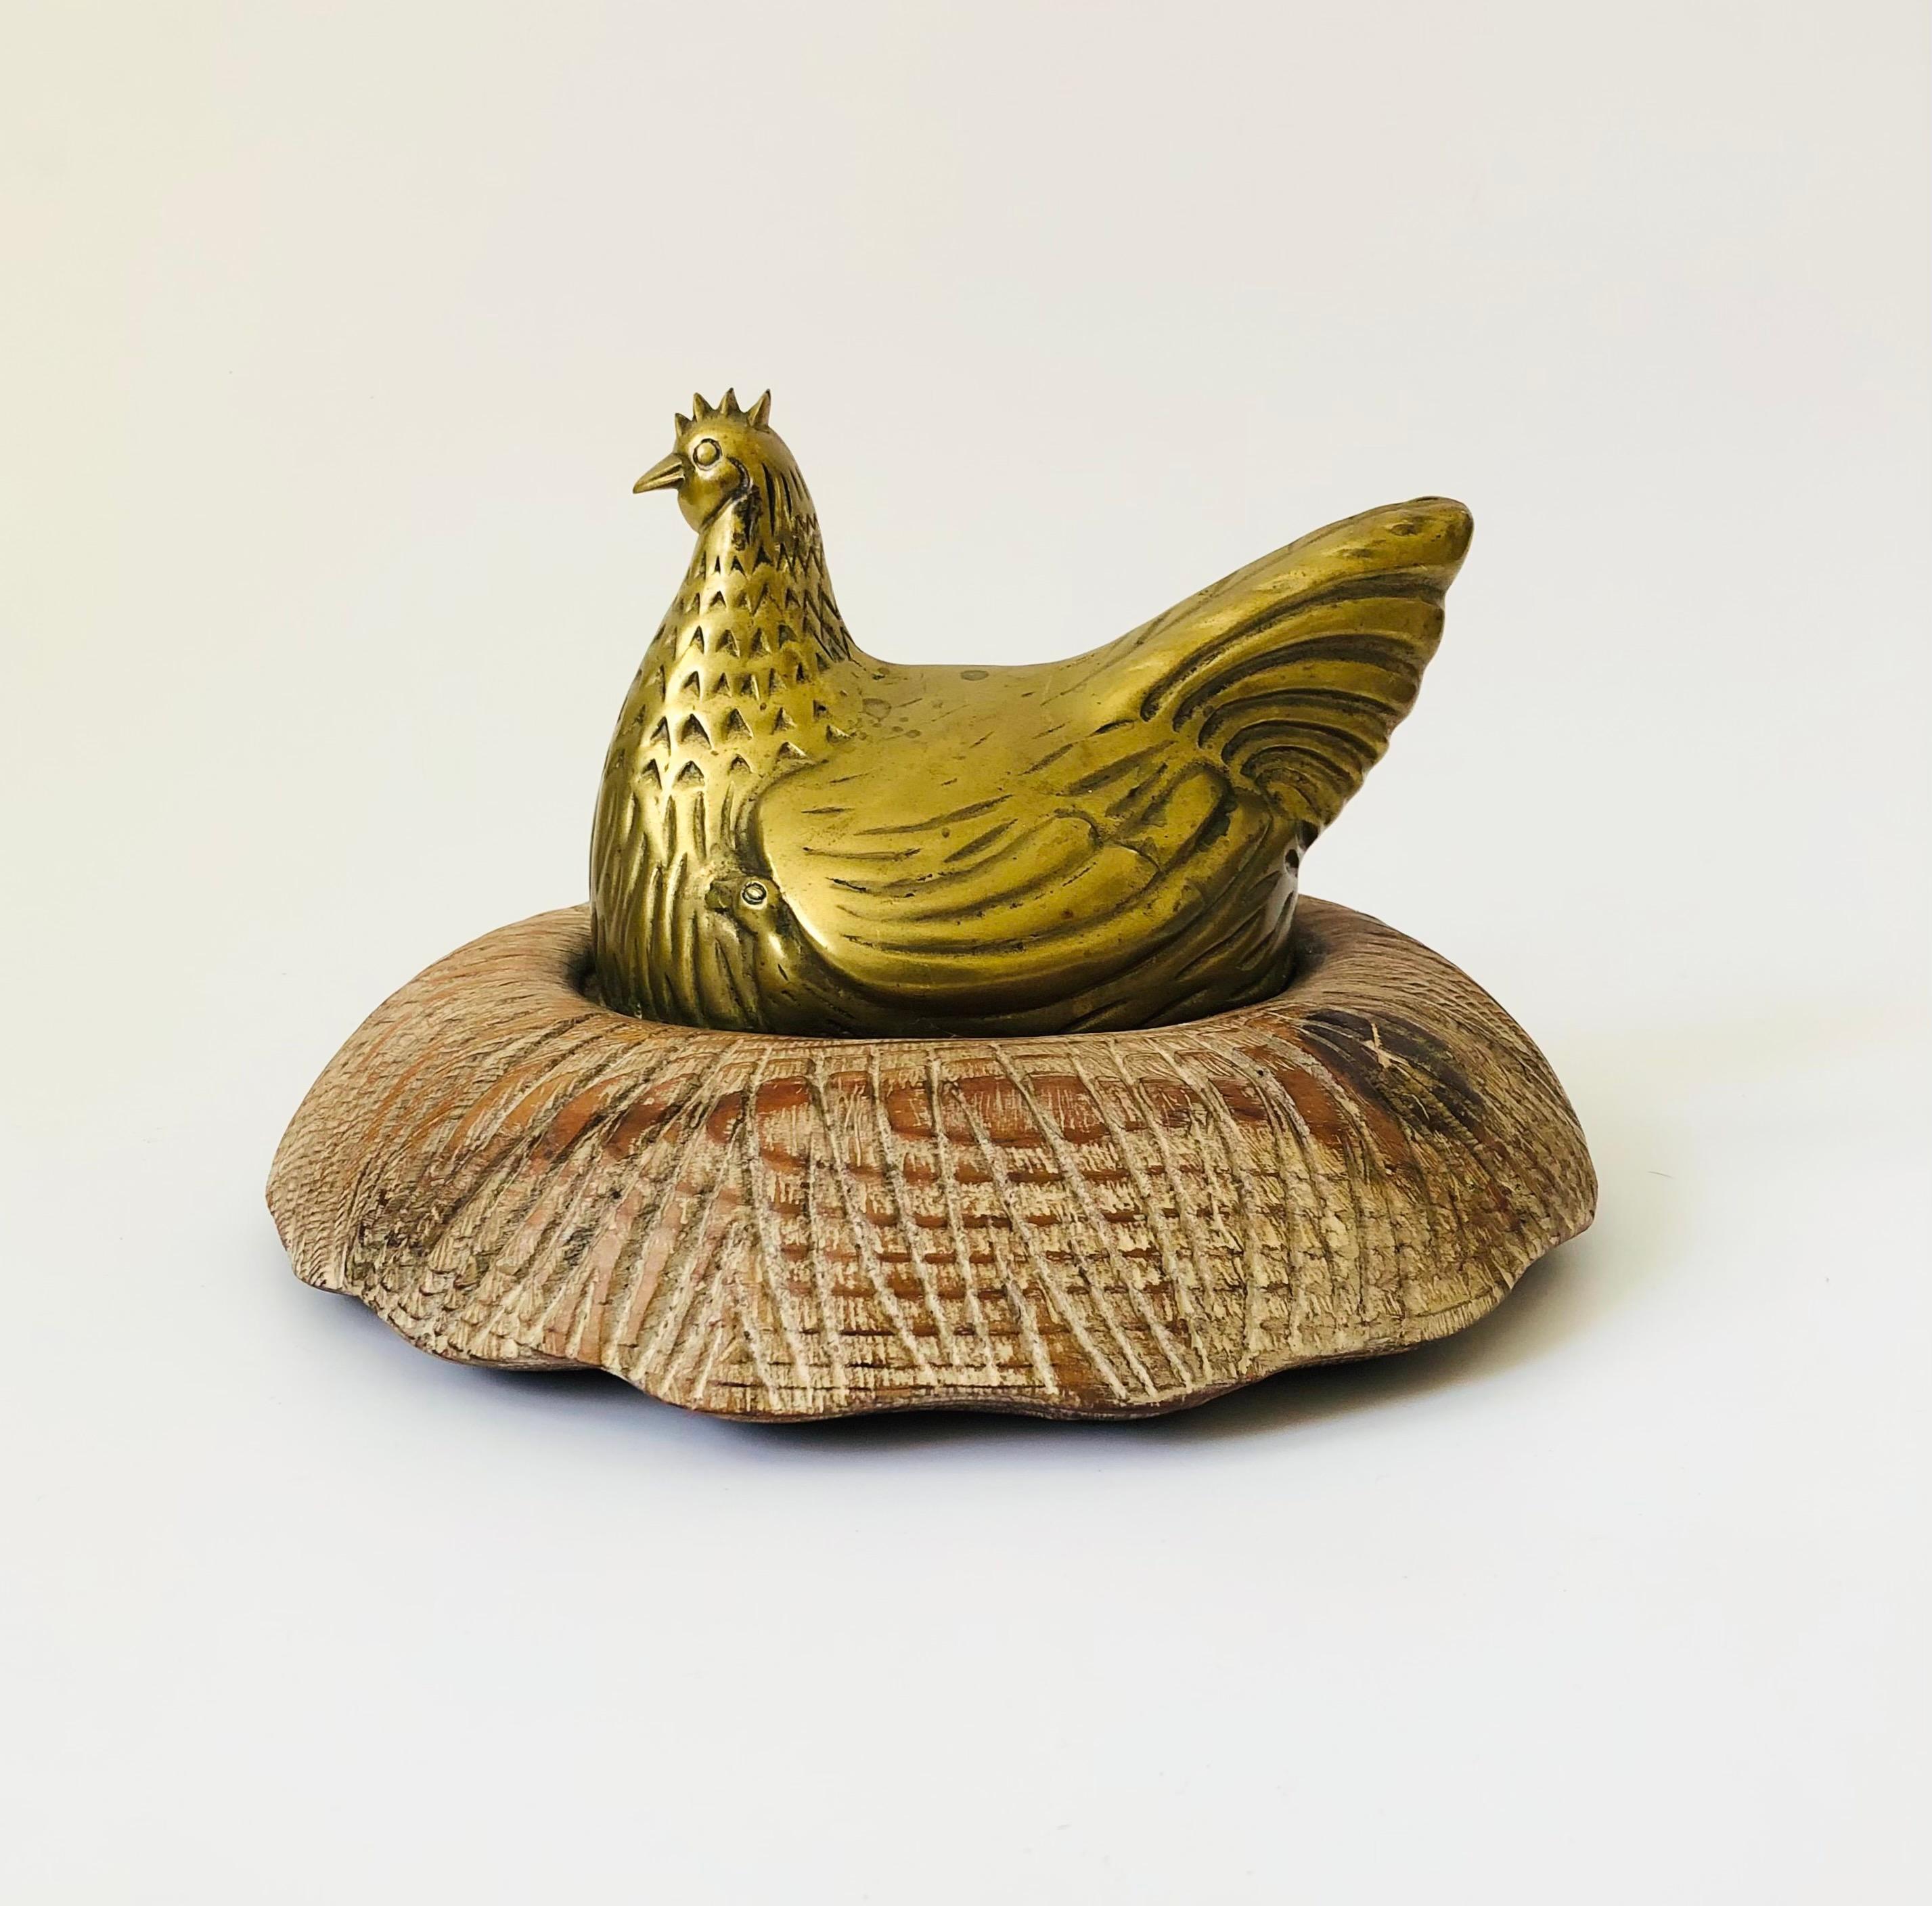 A large vintage brass chicken sitting in a carved wood nest. Great detailing formed into the brass with a distressed white washed finish to the wood nest. The original tag is no longer attached, however this is most likely a piece by Sarried Ltd.